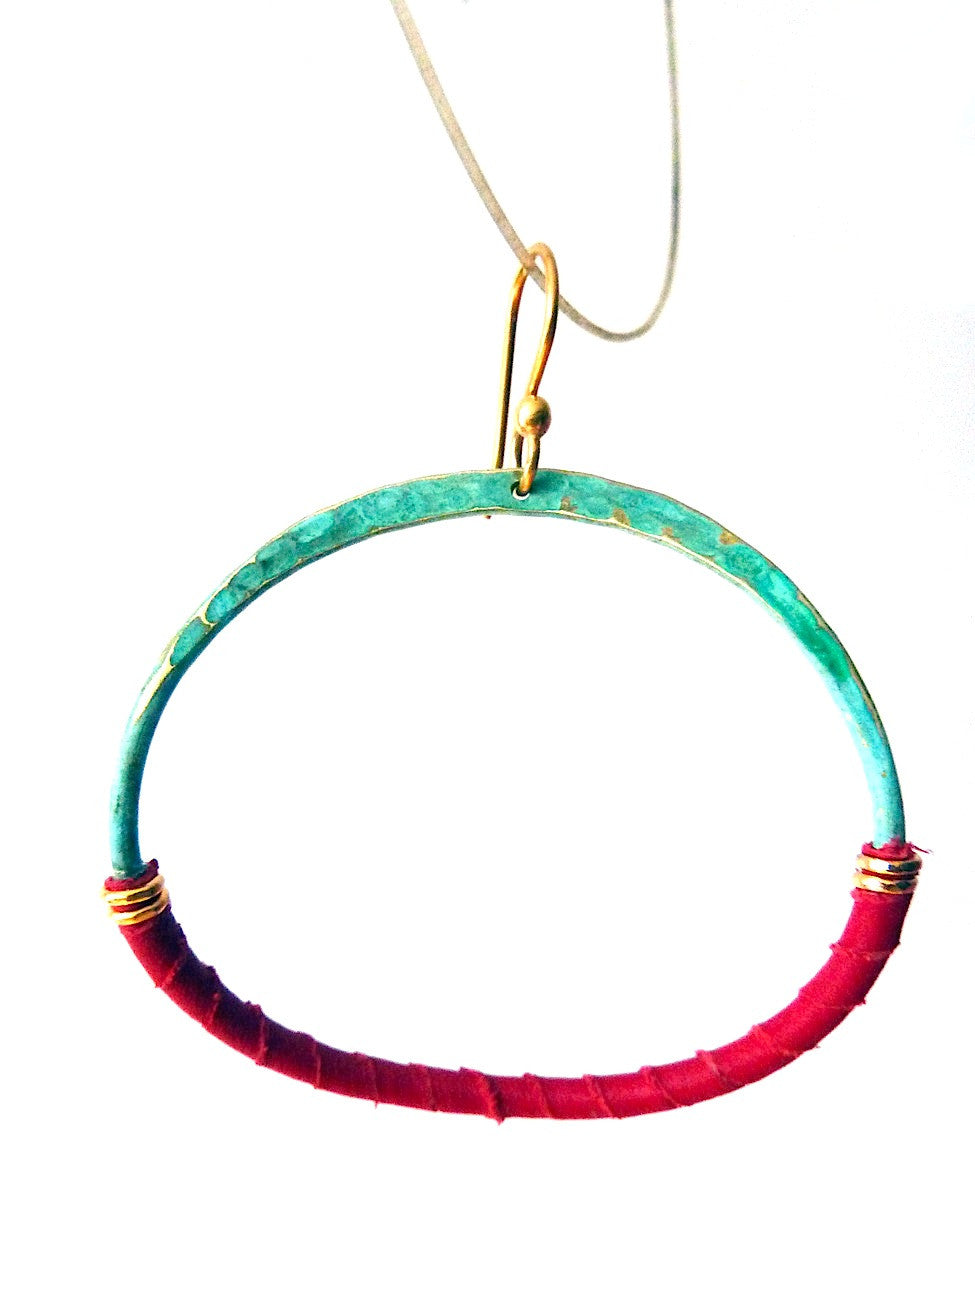 HOOP EARRINGS PATINA AND RED LEATHER SMALL LARGE